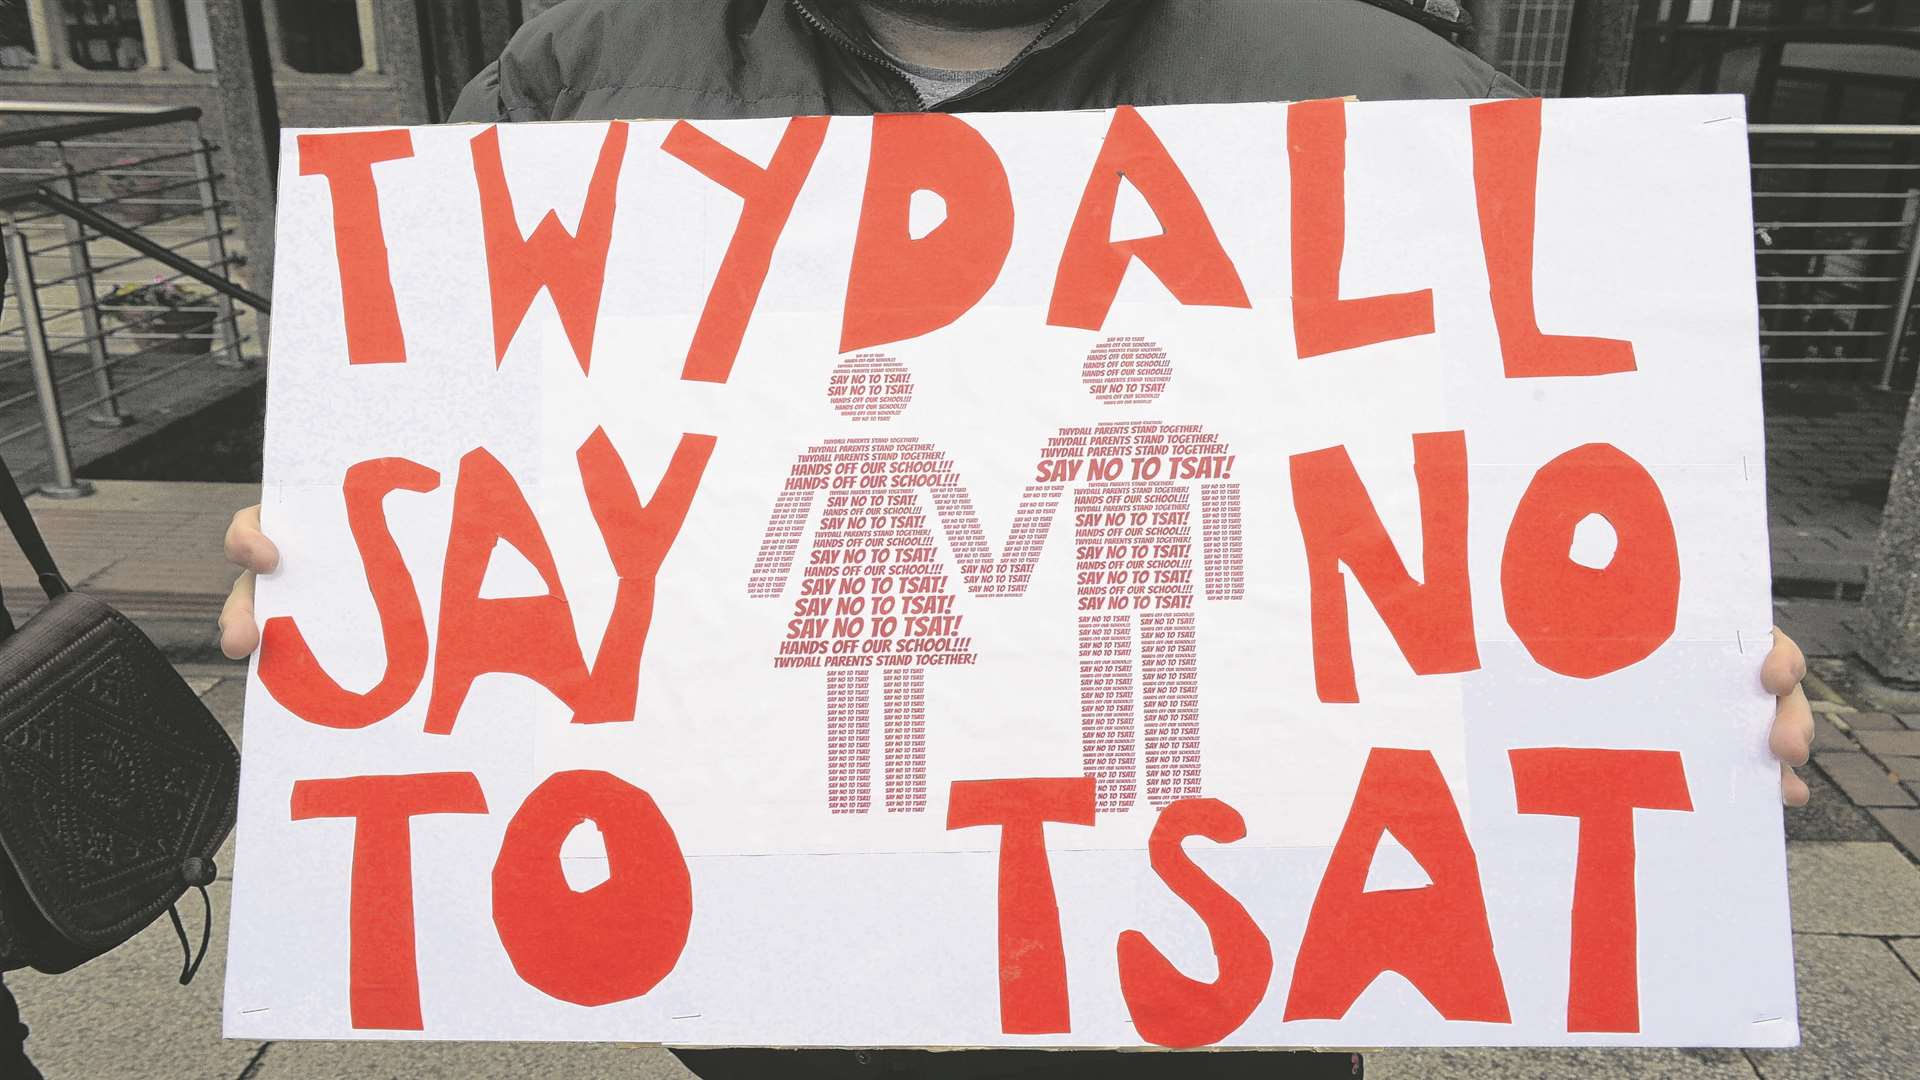 The group, Parents And Twydall Together, said they were delighted with the governors' decision.